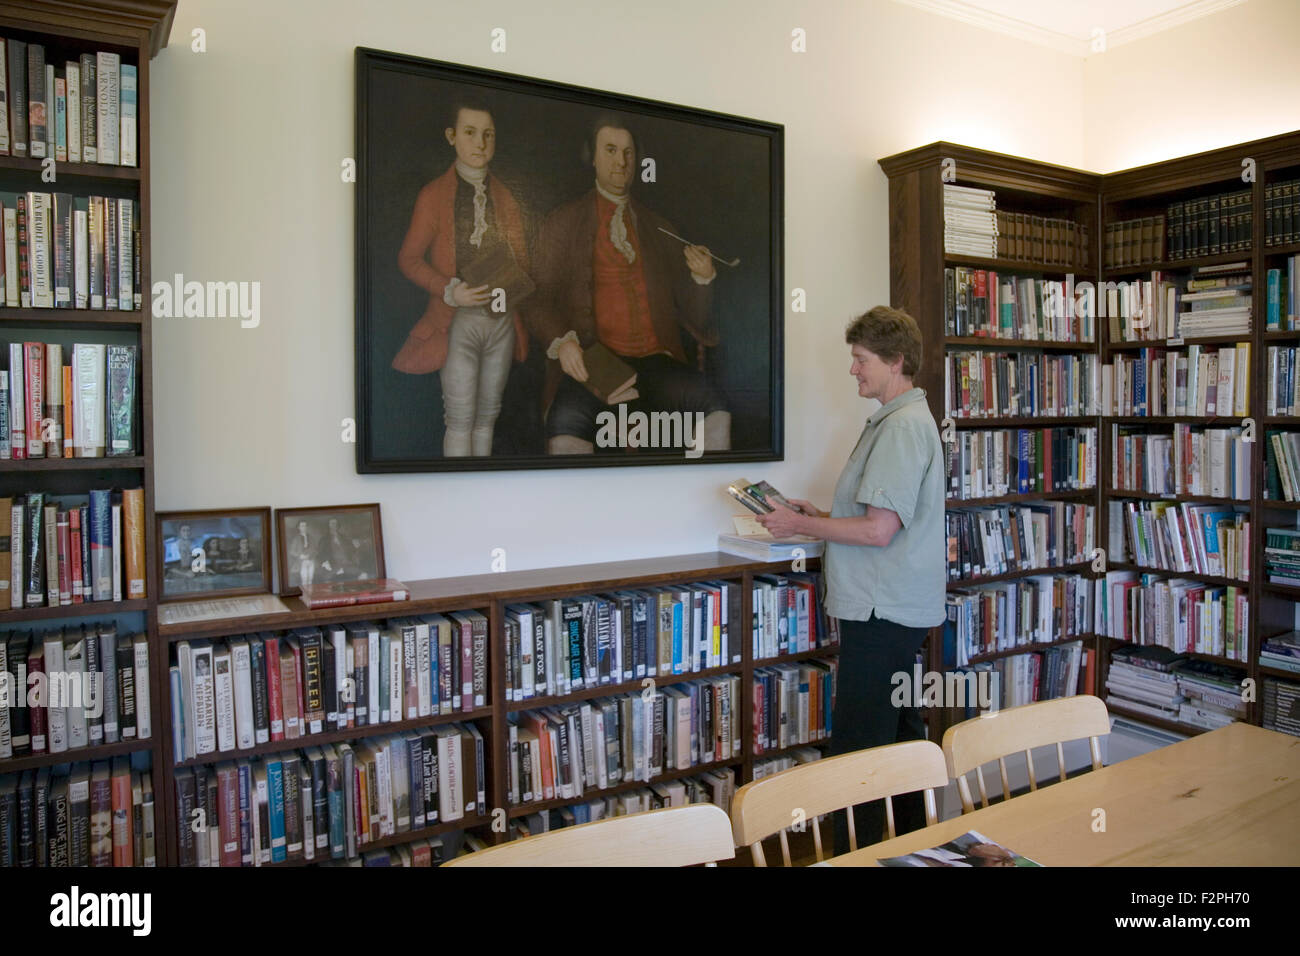 The Craftsbury Public Library and portrait of Ebenezer  and Samuel Crafts, Craftsbury Common, Vermont, USA Stock Photo